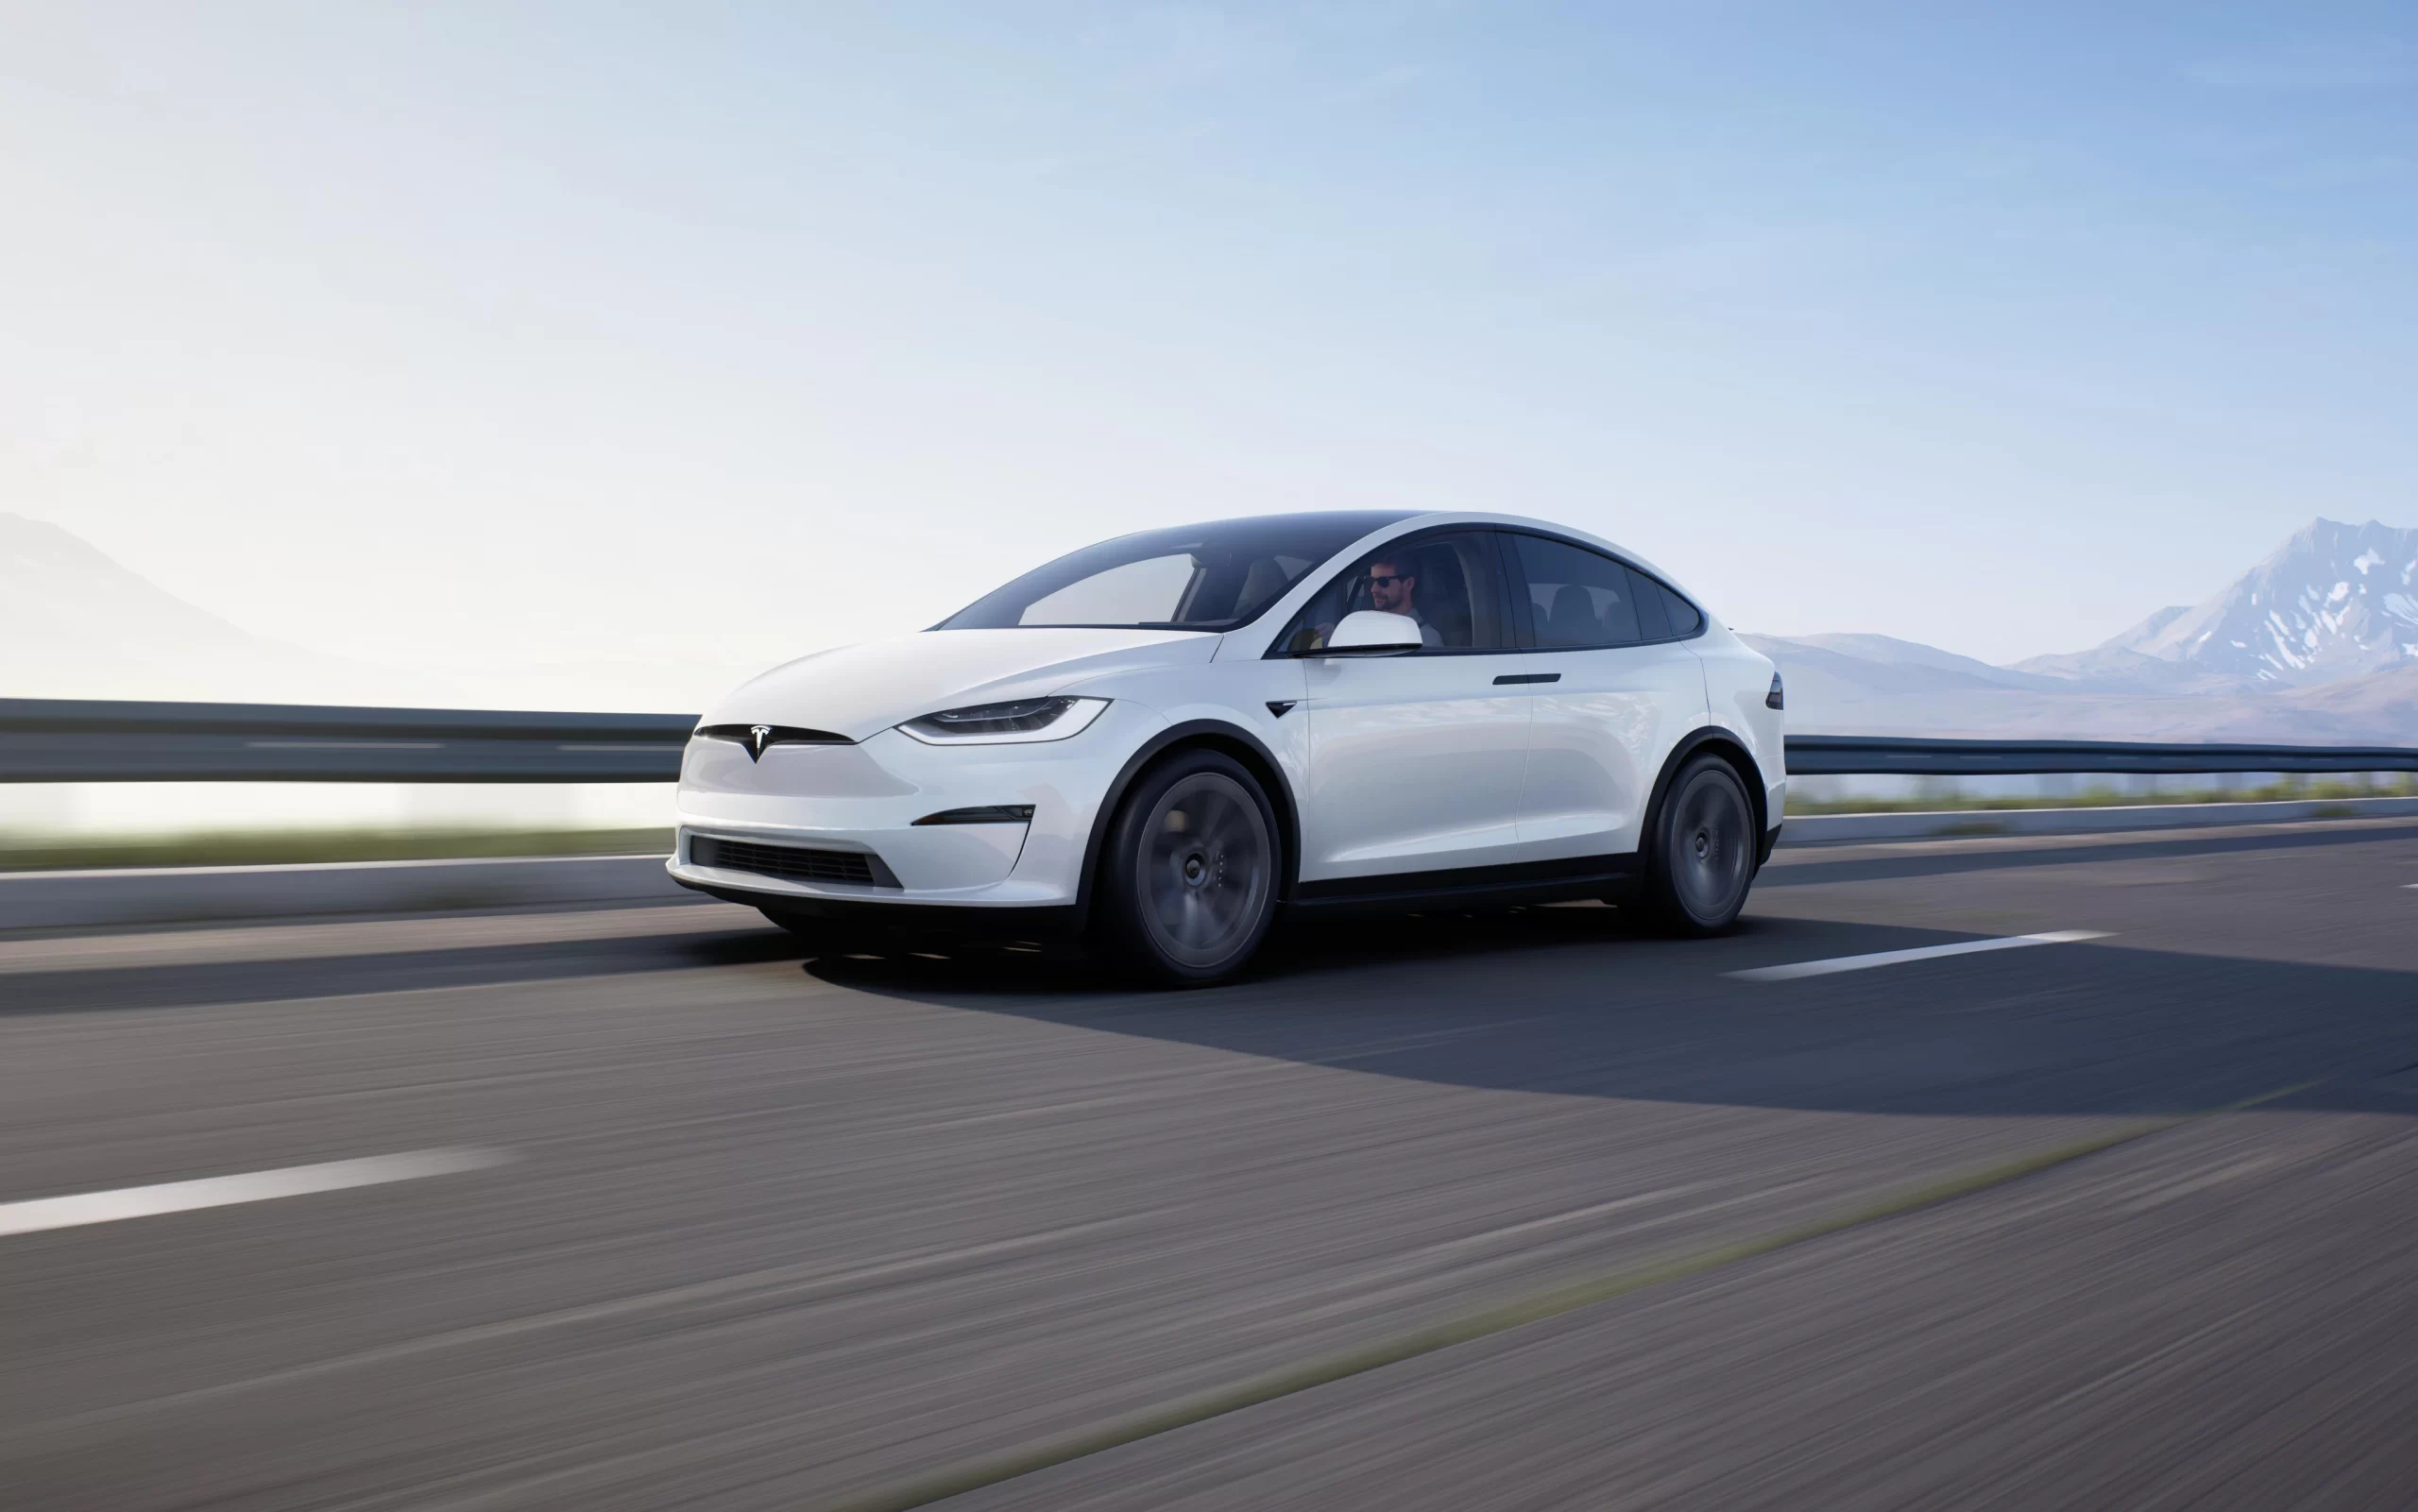 The Tesla Model X is a Midsize SUV With a Powerful 1,020-Horsepower Engine